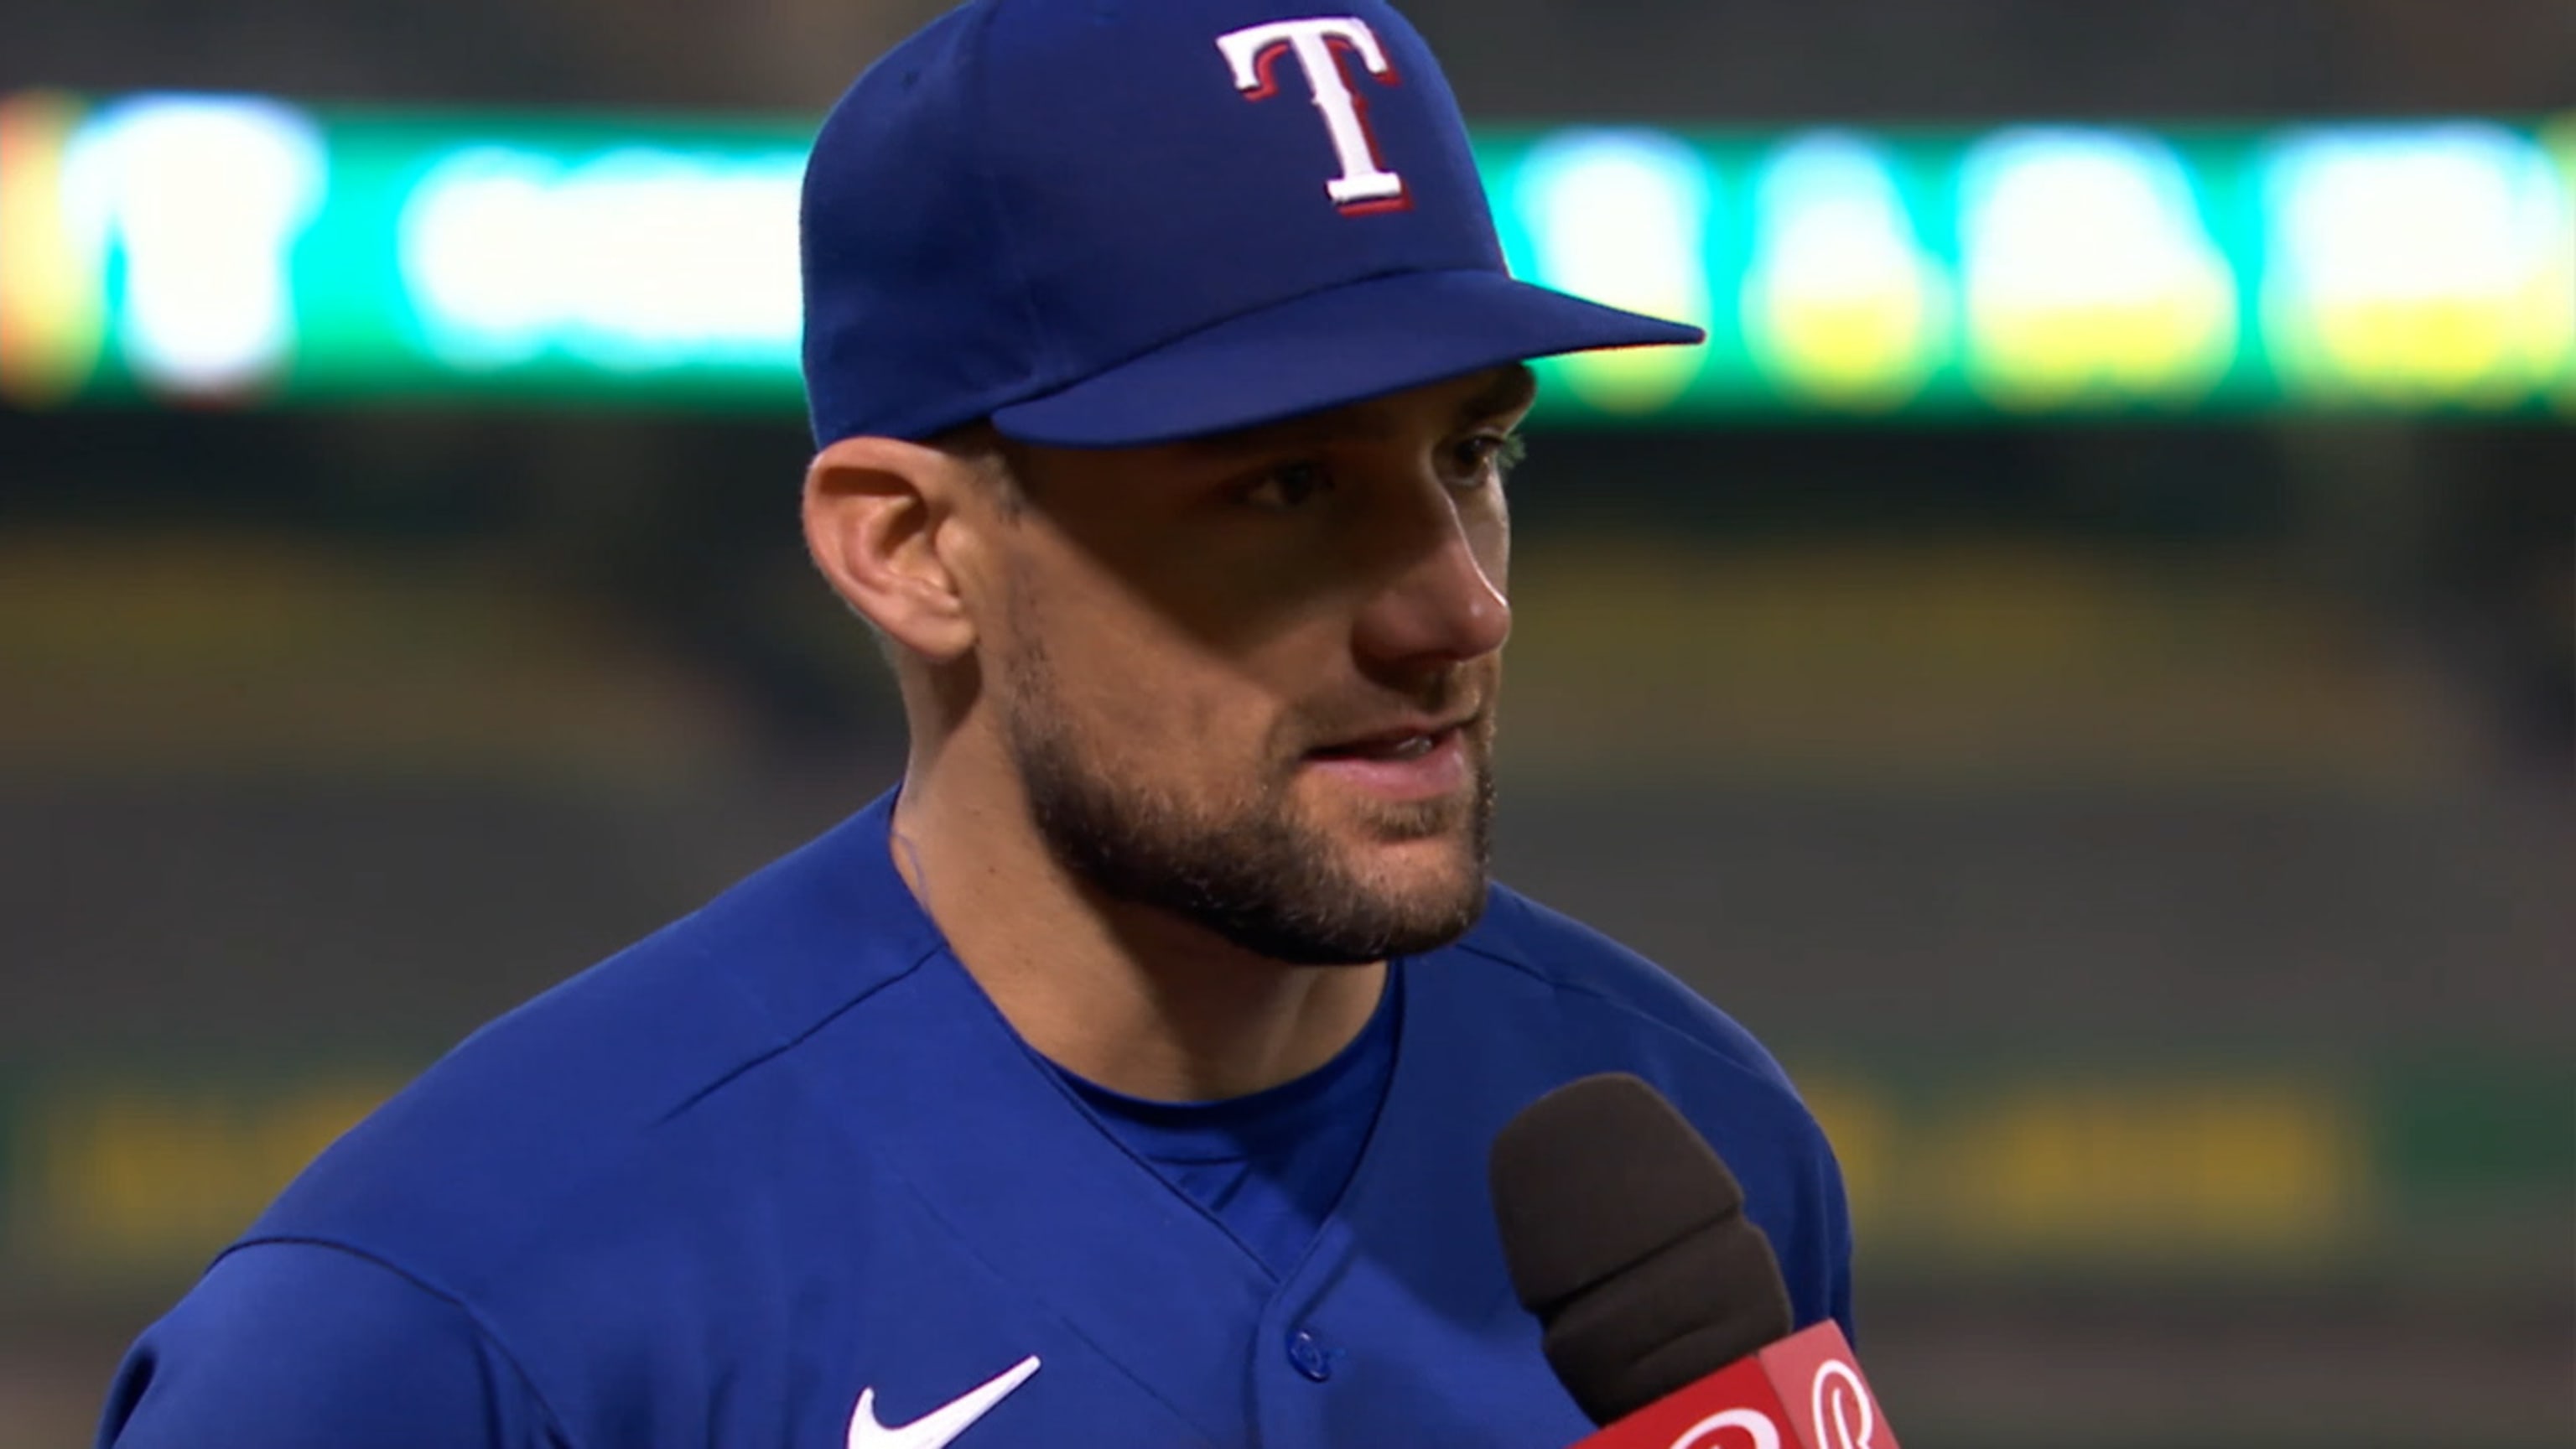 Nathan Eovaldi strikes out career-high 12 in Rangers' 4-0 win over A's